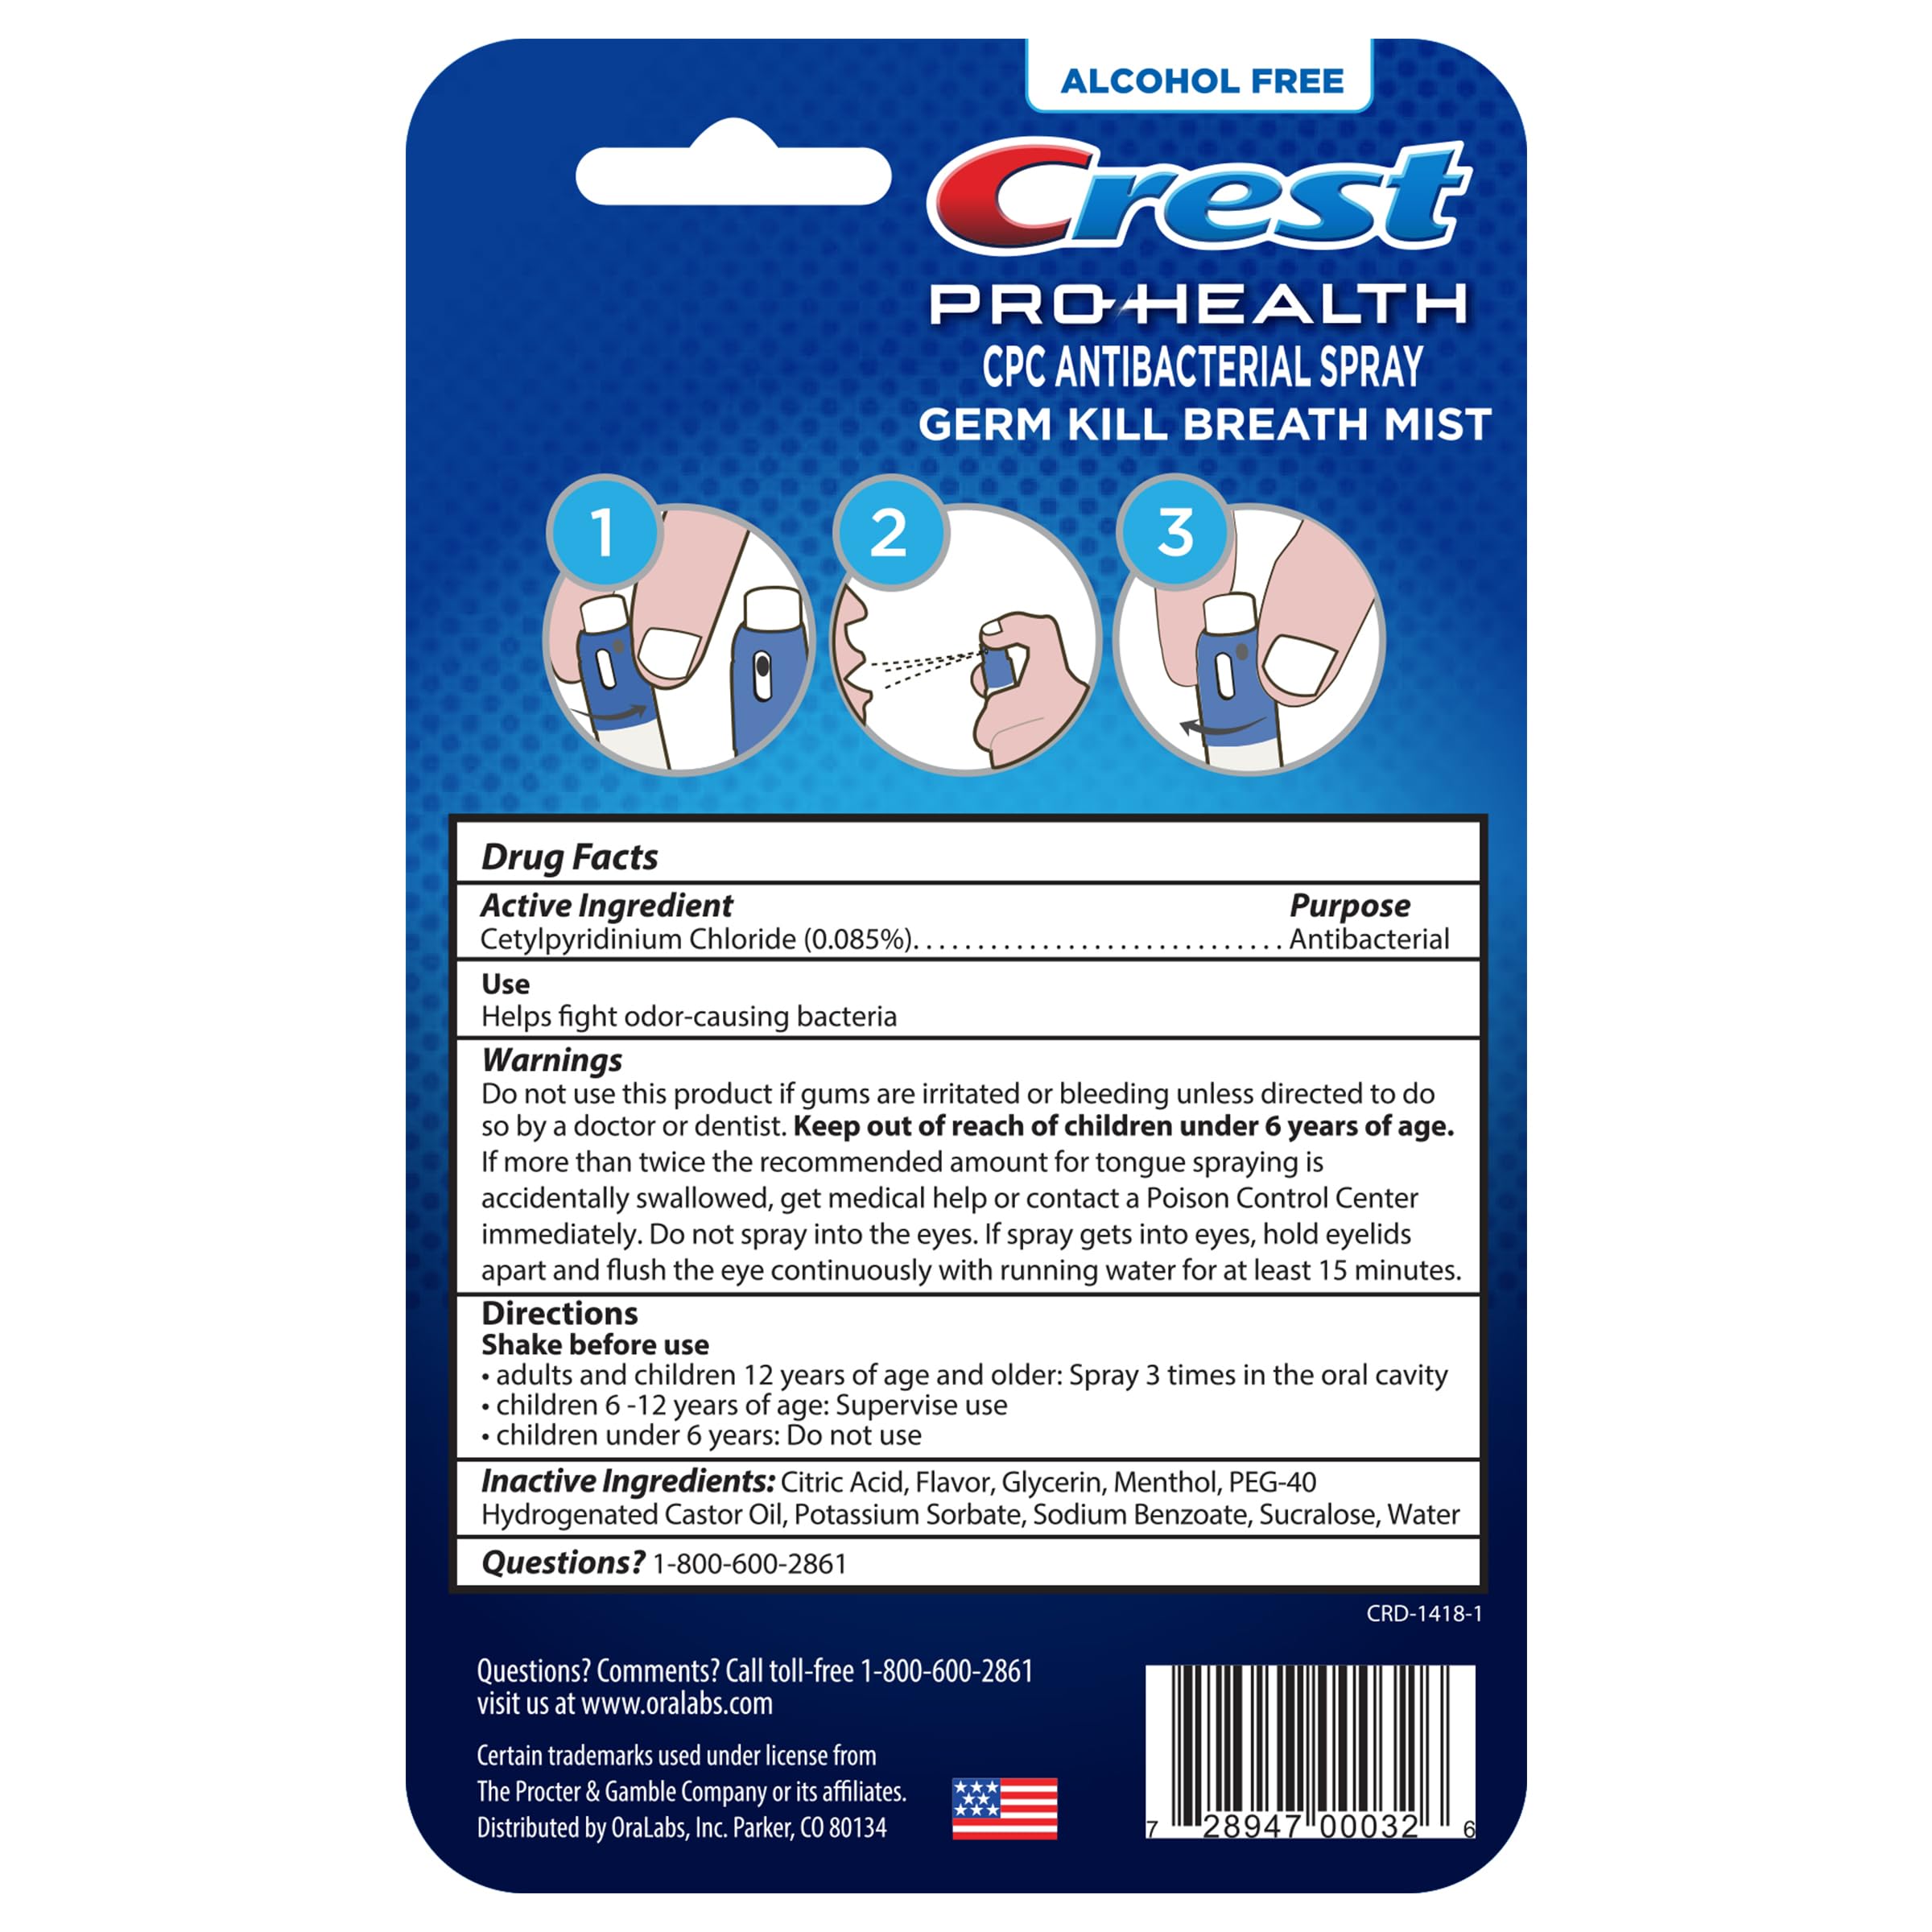 Crest Pro-Health | Portable Alcohol-Free CPC Mist with Clean Mint Flavor | Fights Odor-Causing Germs for Instant Fresh Breath - 1 Count (0.44oz) Breath Spray